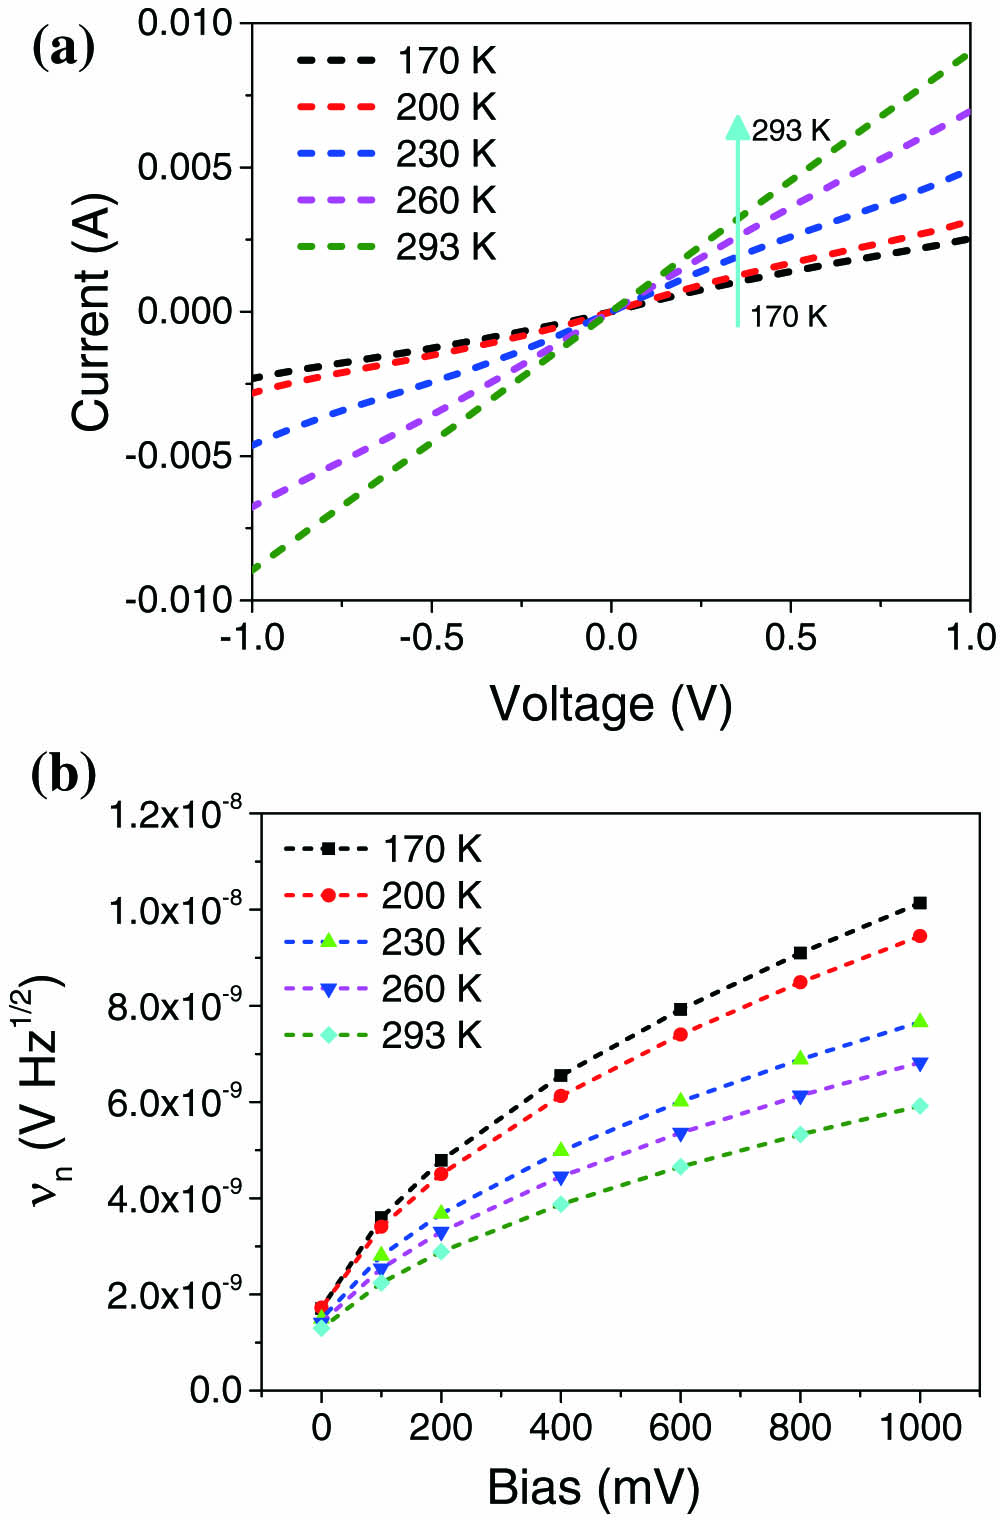 Dark current and noise of the detector. (a) Current–voltage (I–V) characteristic curves of the detector at temperatures from 293 to 170 K. (b) Calculated voltage noise of the detector with respect to bias at different temperatures.